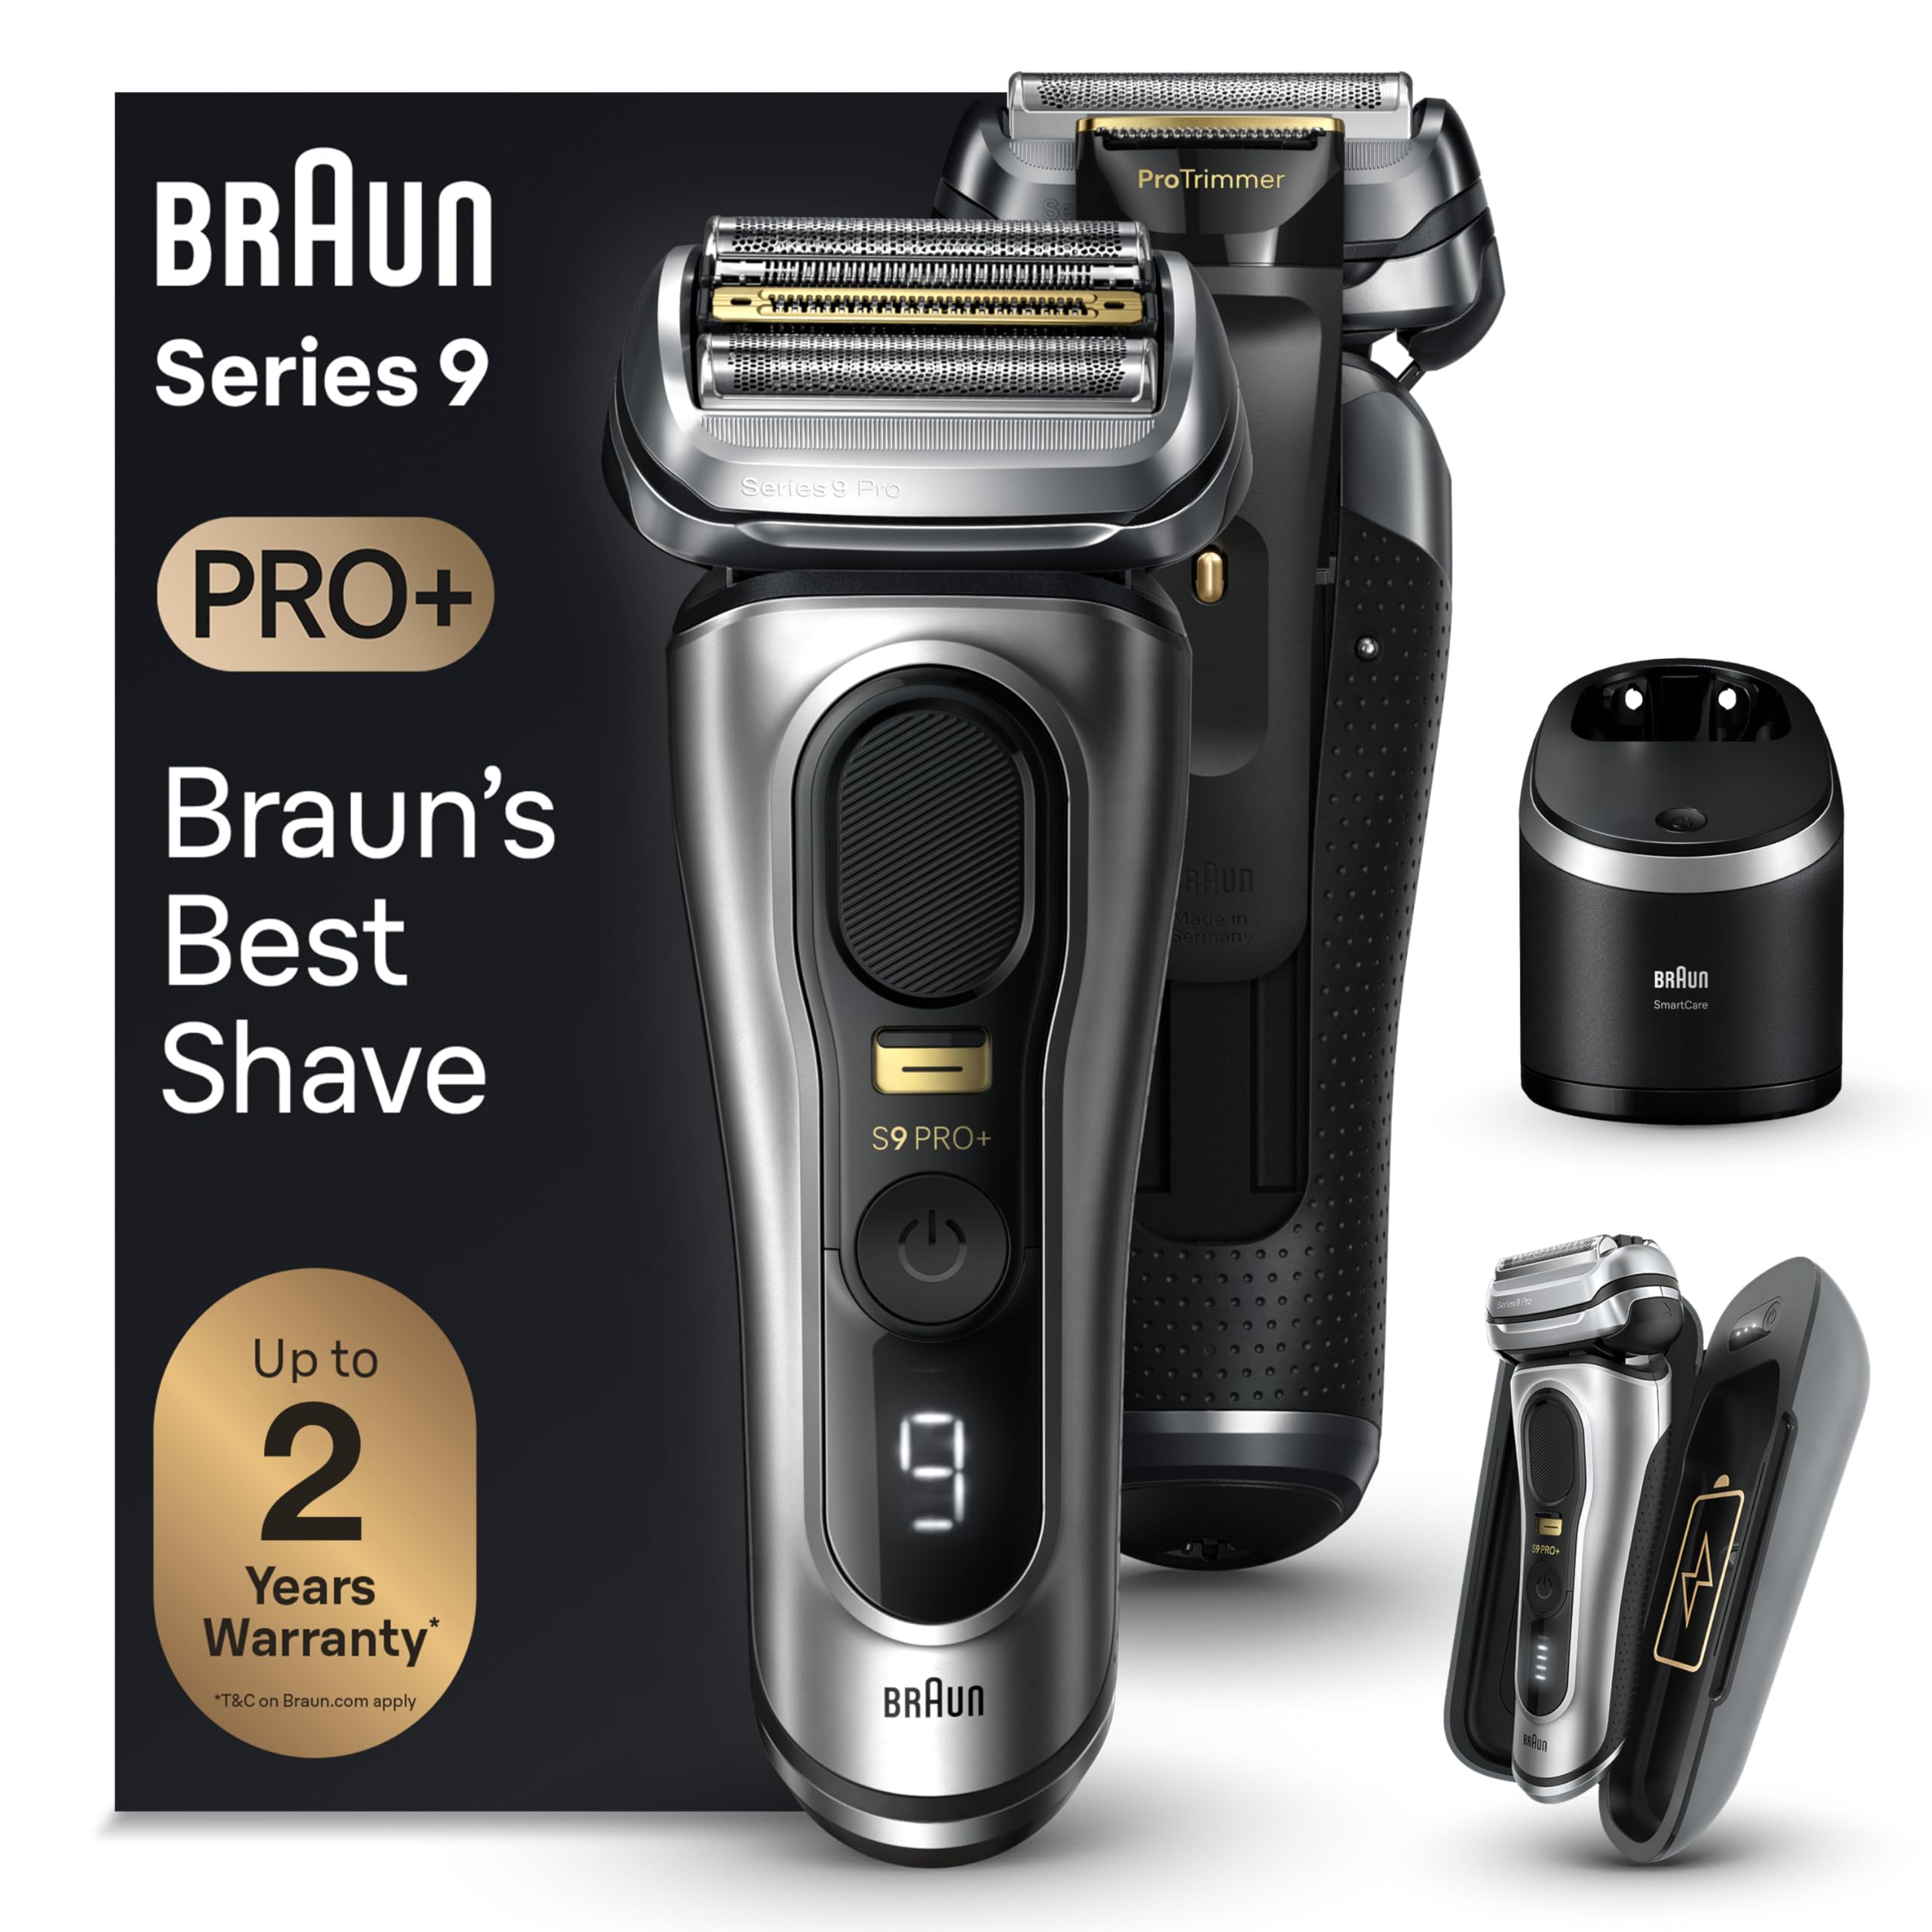 Braun Series 9 PRO+ Electric Razor for Men, 5 Pro Shave Elements & Precision Long Hair Trimmer, 6in1 SmartCare Center, PowerCase for Mobile Charging, Wet & Dry Electric Razor, 60min Battery Runtime